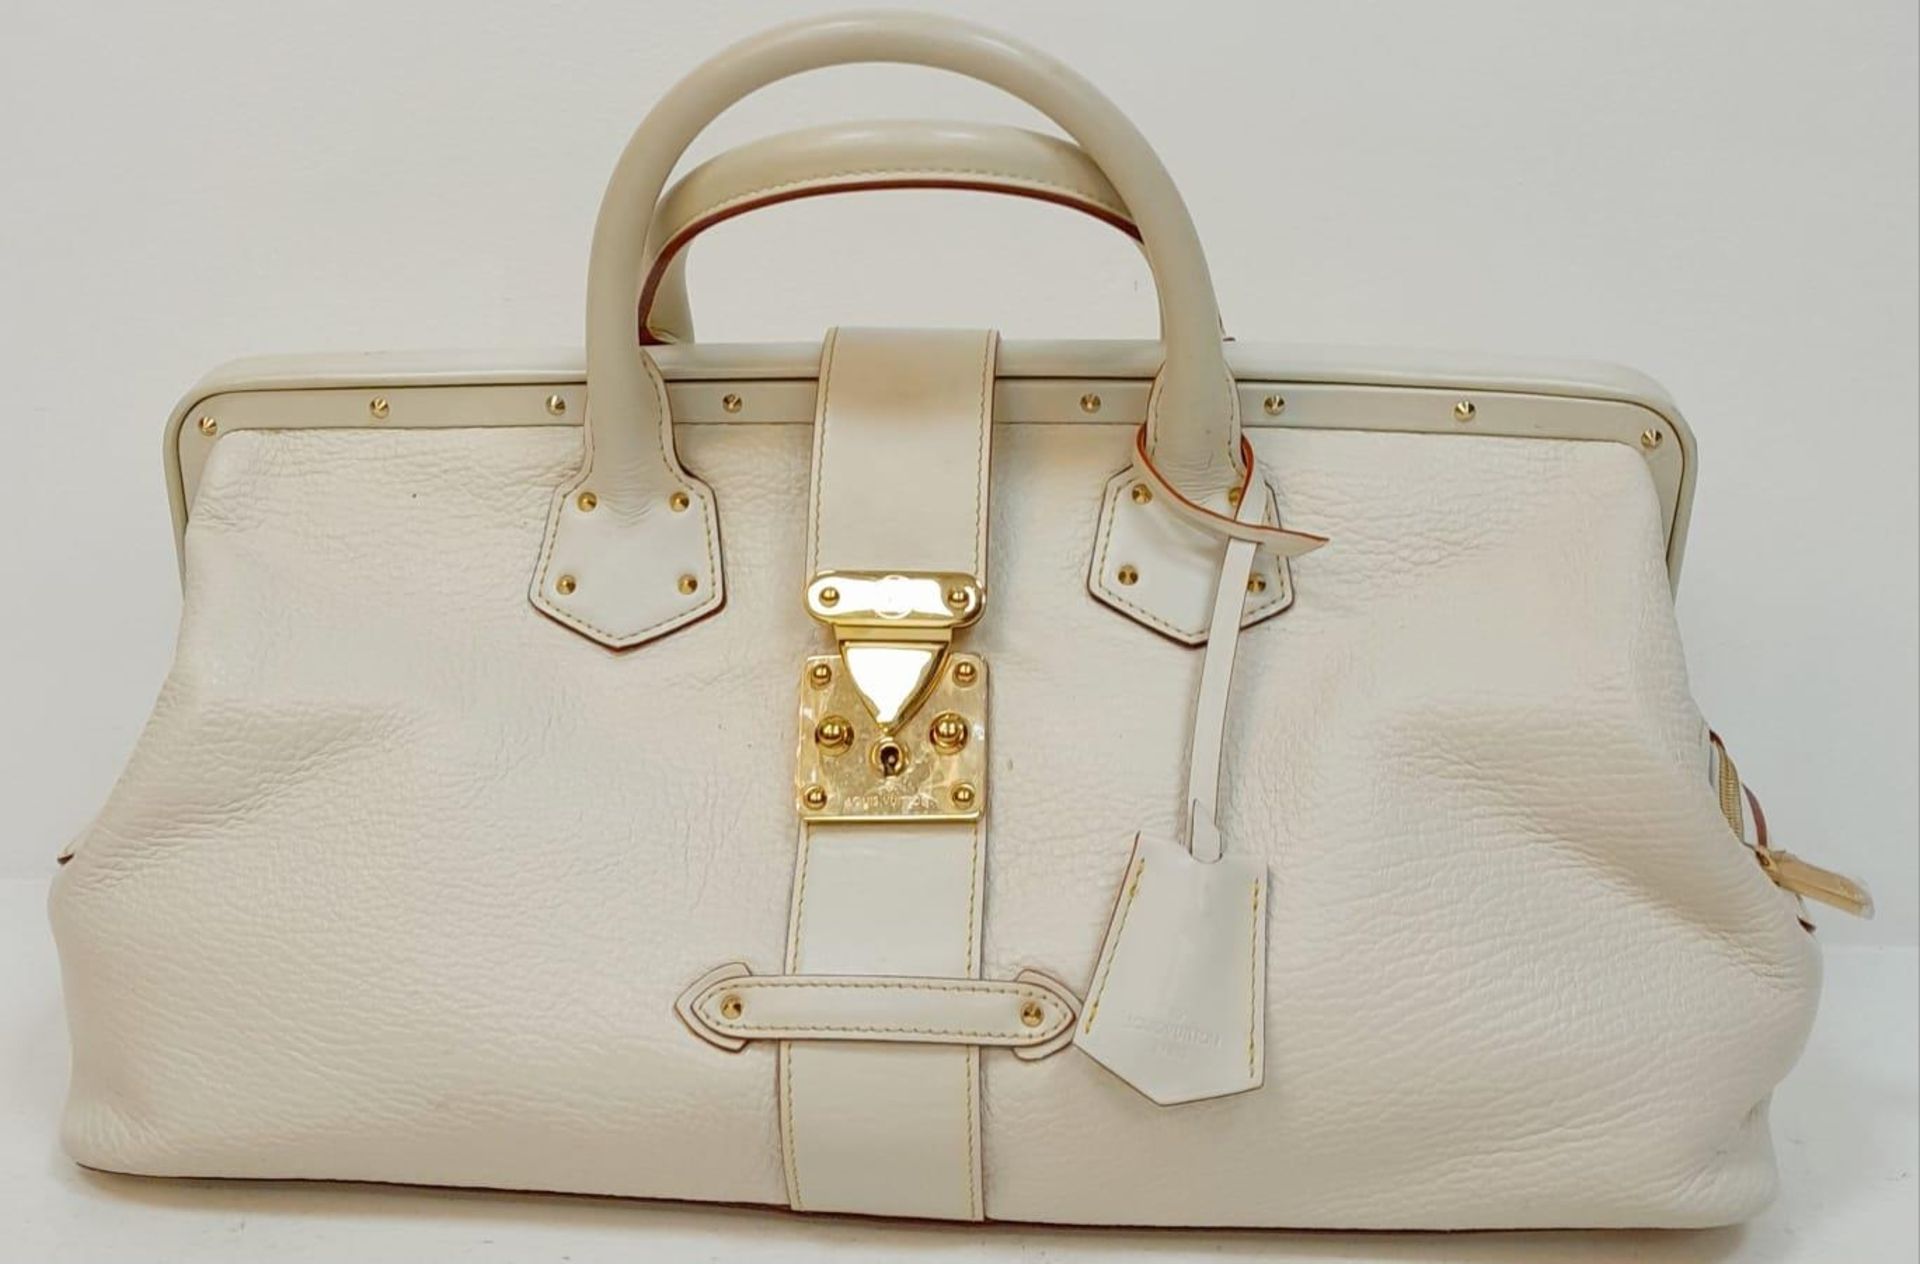 A Louis Vuitton Manhattan PM Suhali Leather Handbag. Soft white textured leather exterior with